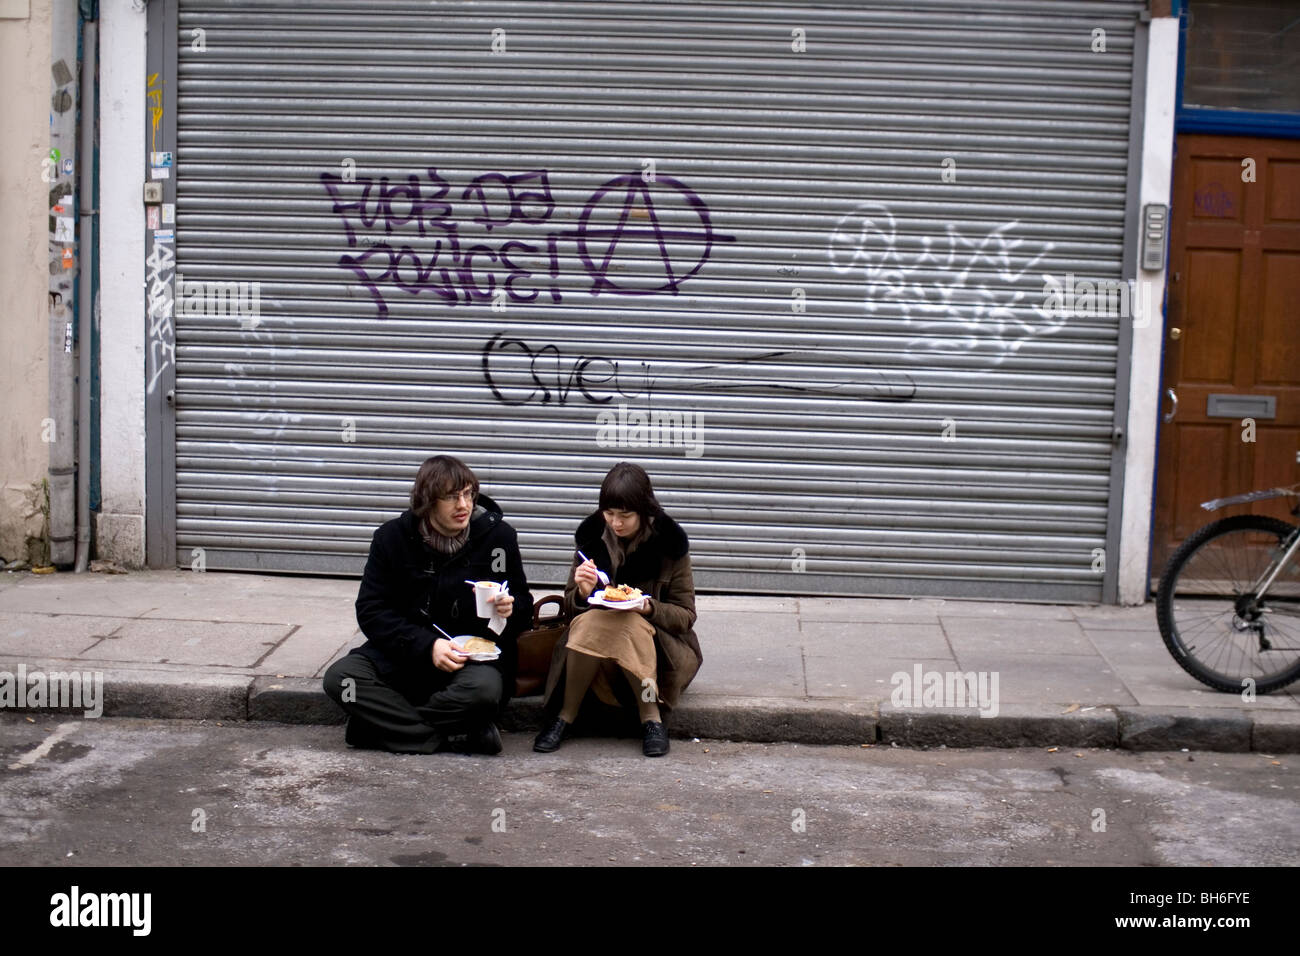 A couple sit and eat their take-away while sitting on a curb in London. Stock Photo